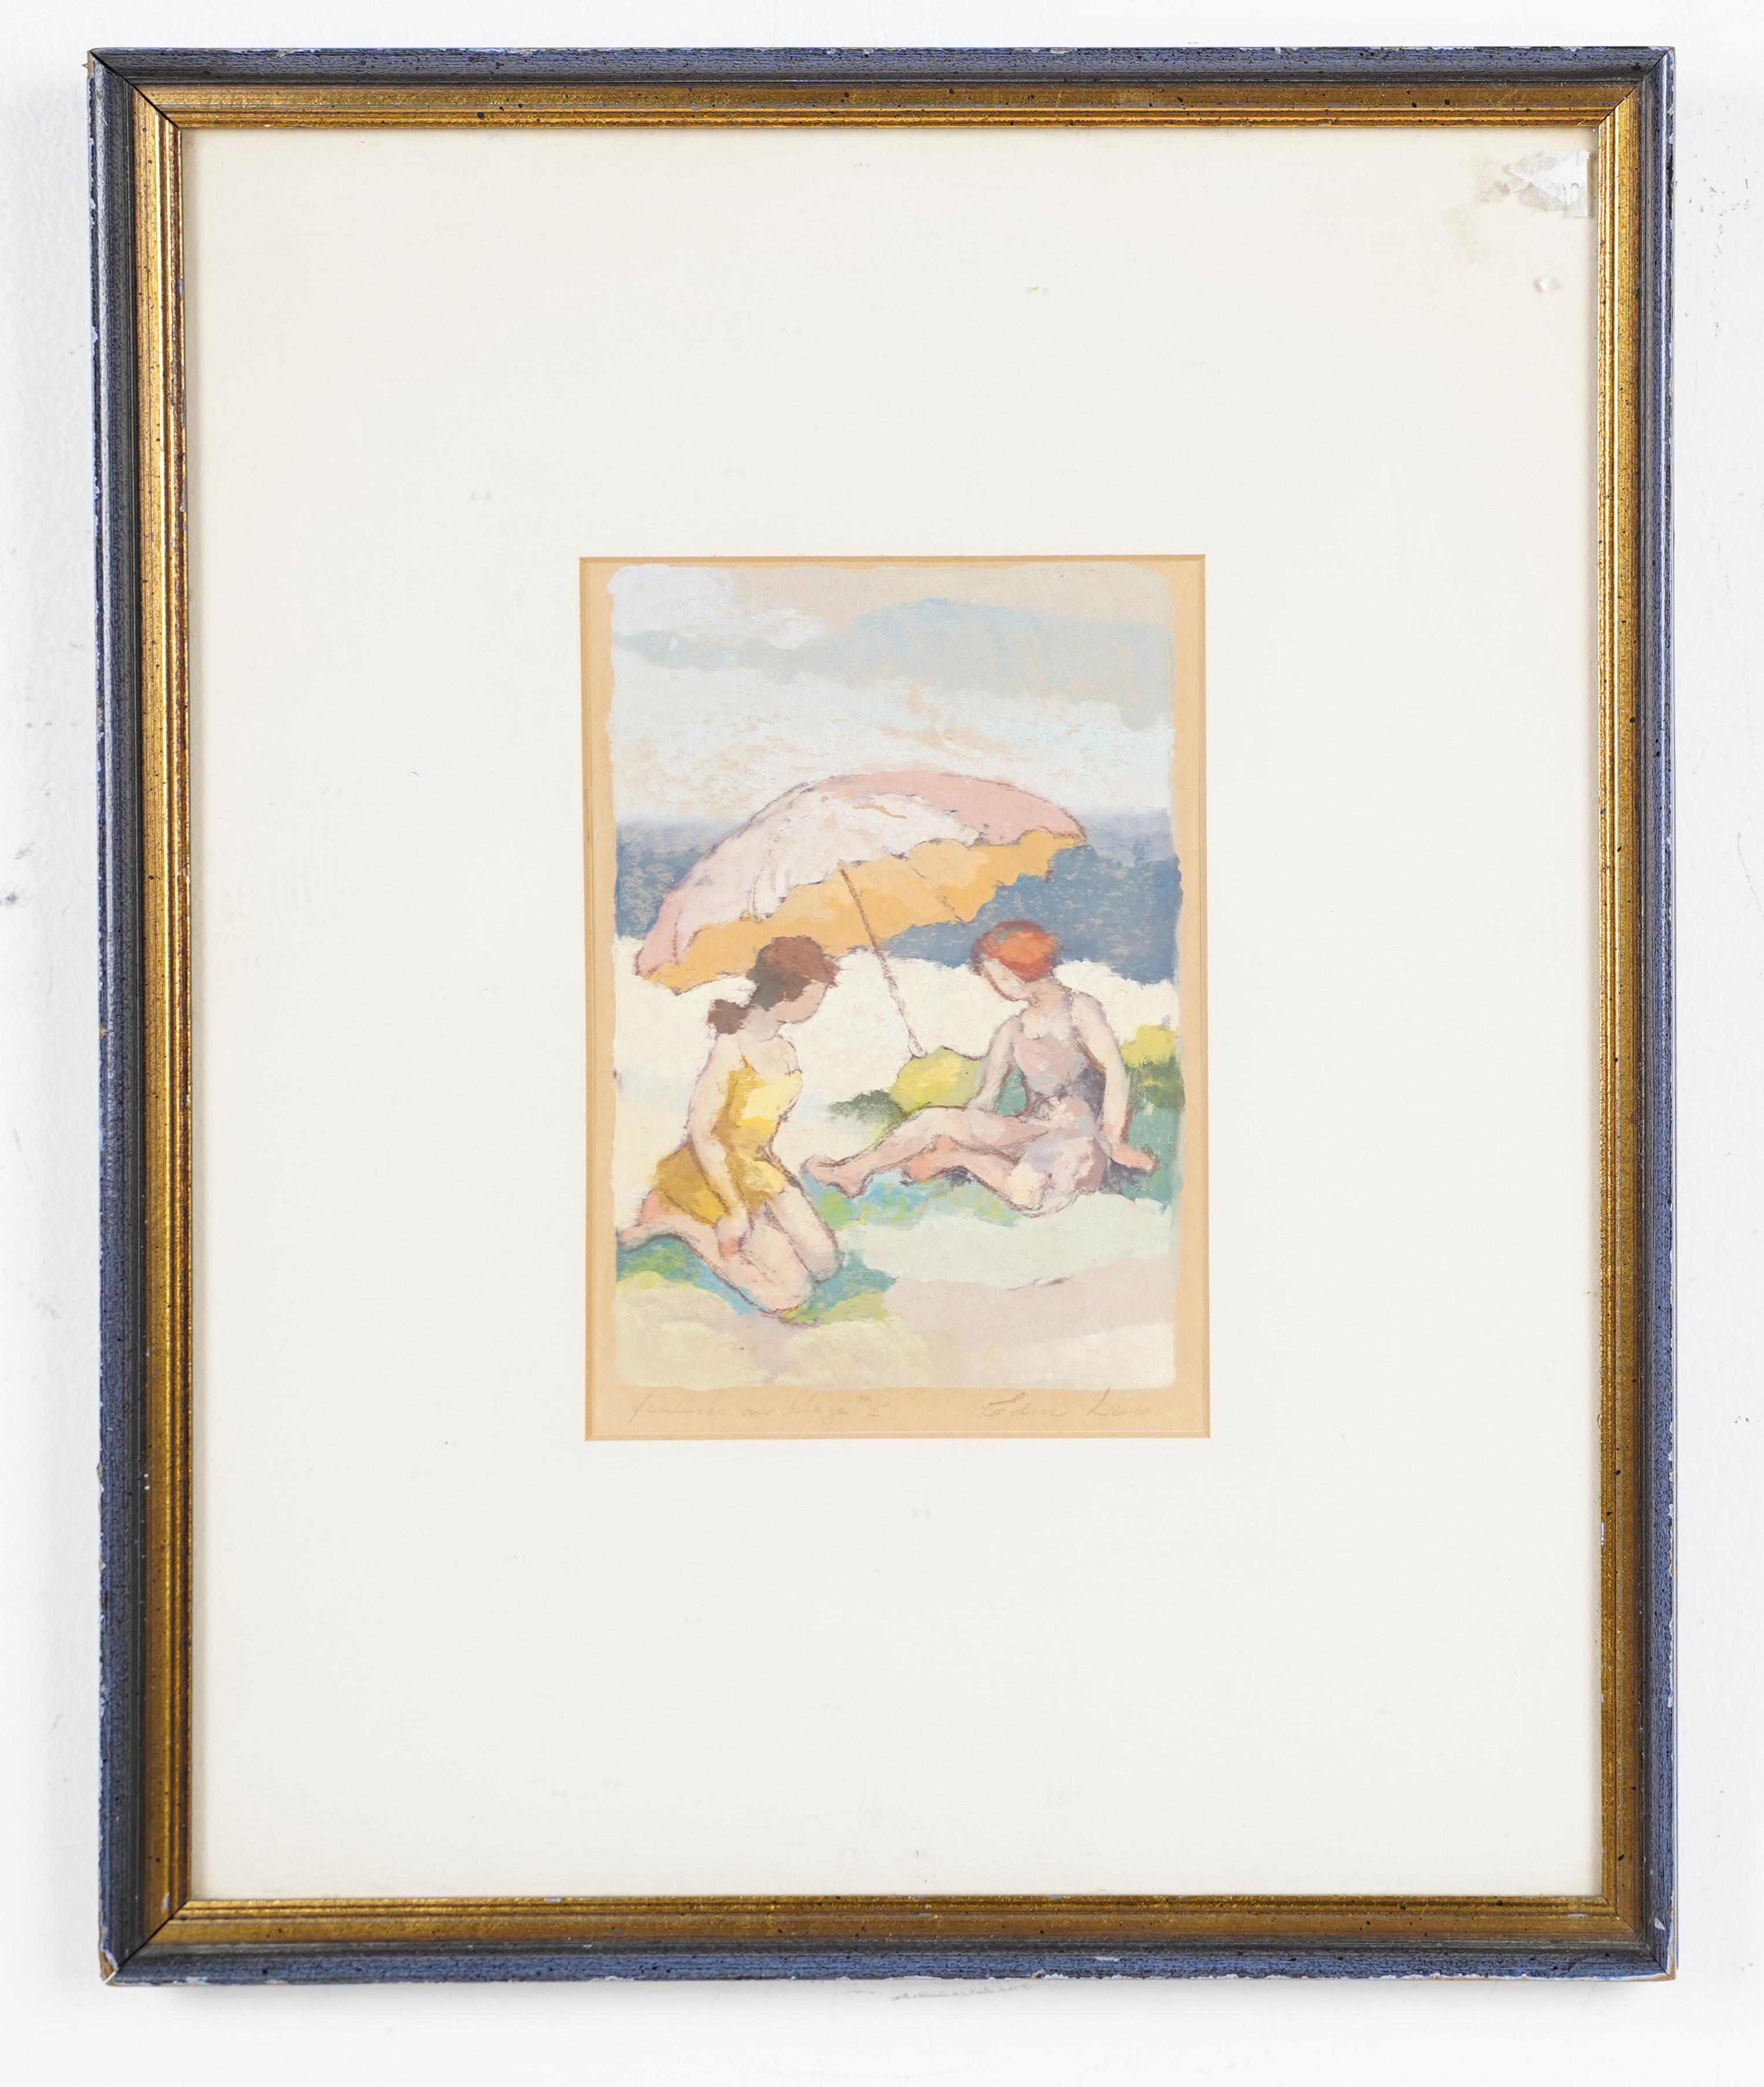 Antique French impressionist beach scene painting.  Gouache on board.  Nicely framed.  Image size, 4.5L x 6.5H.  Signed.
